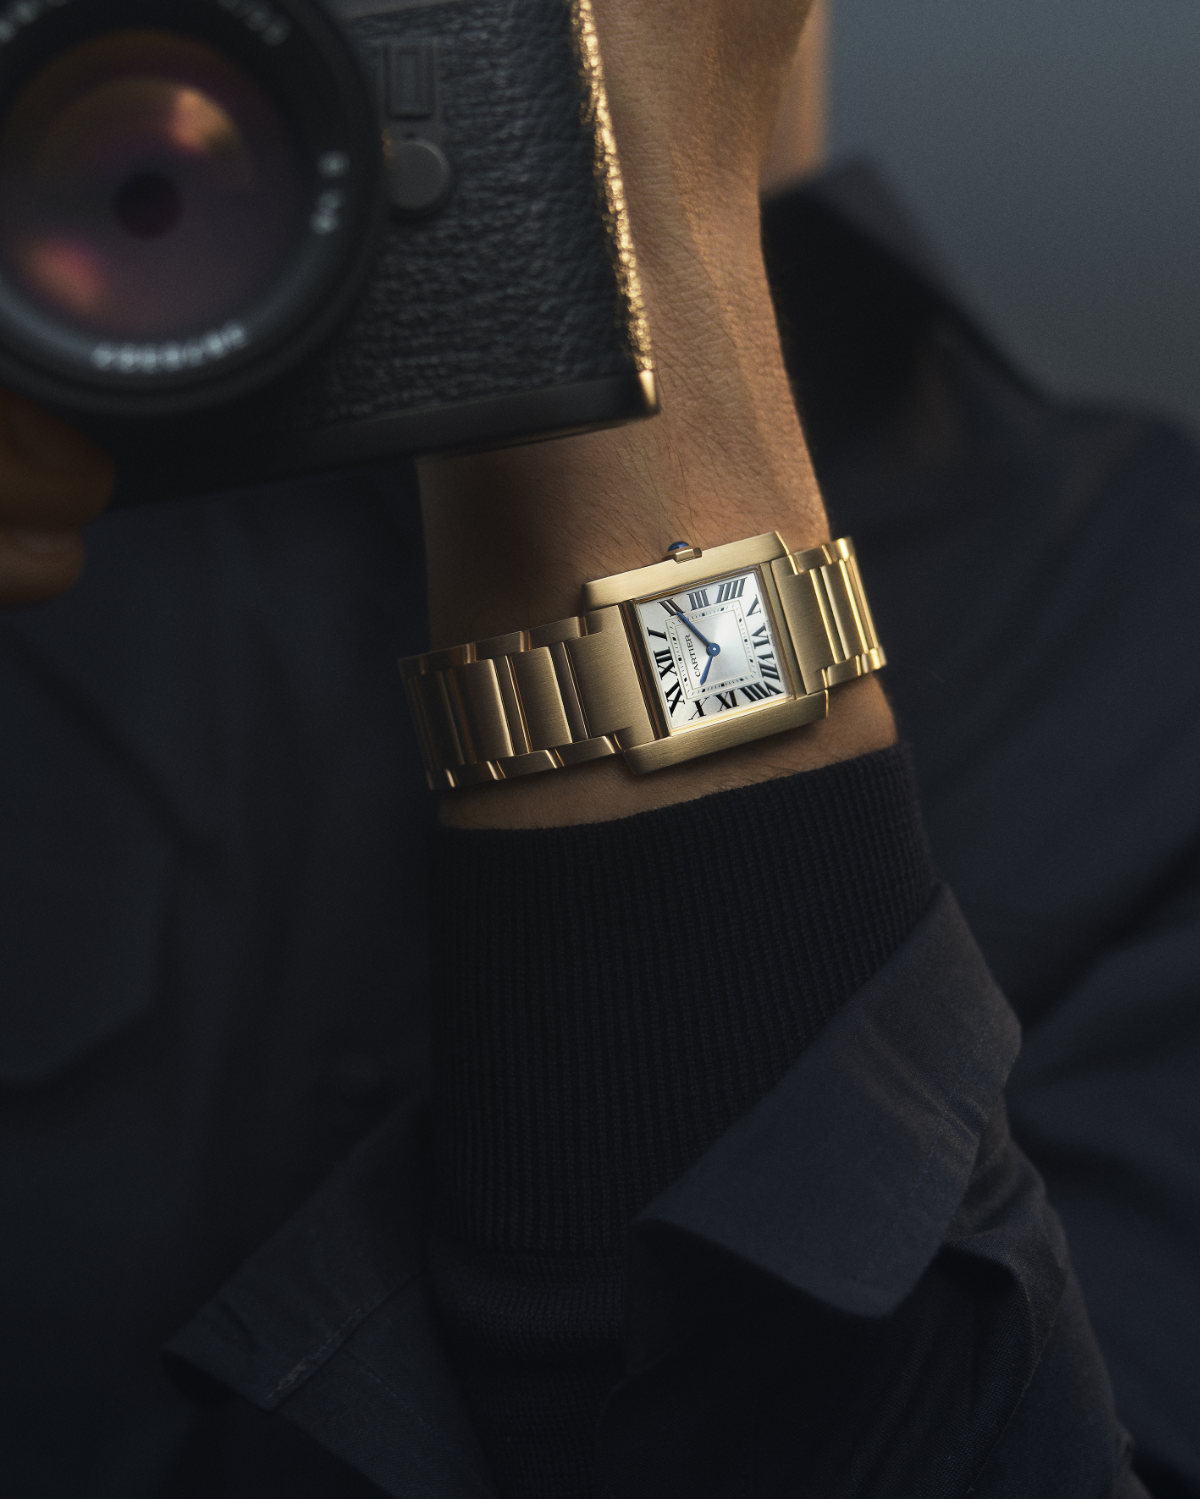 Cartier’s Tank Française Watch Is Back In The Limelight